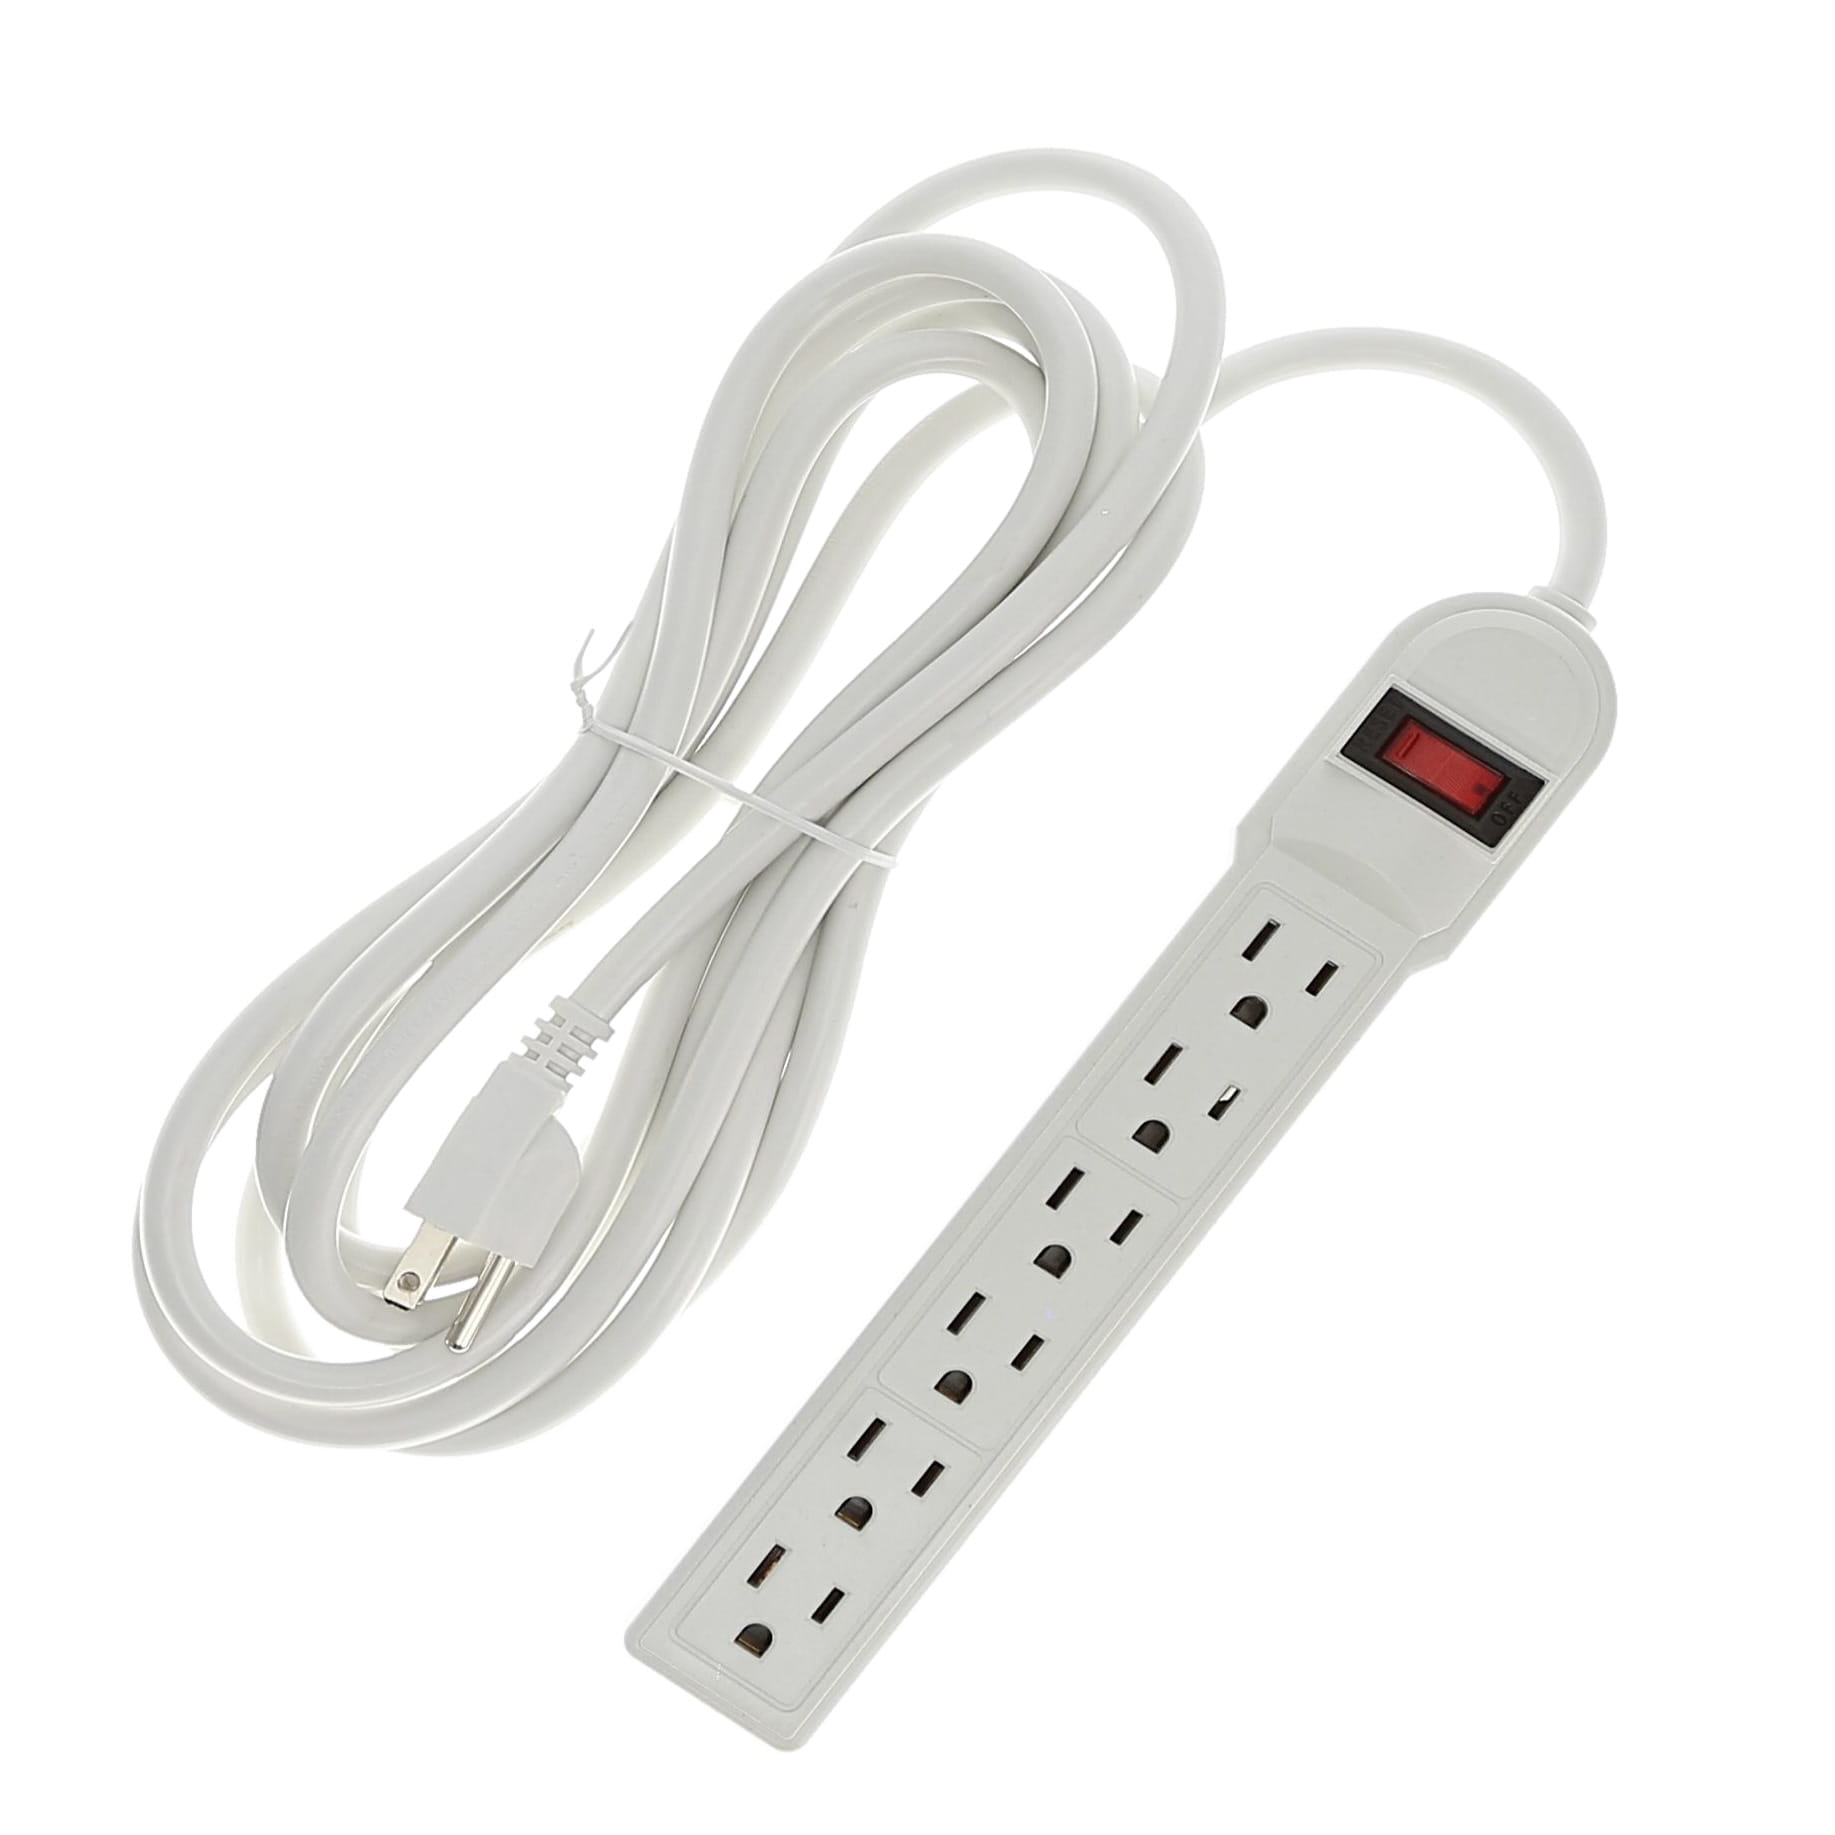 12Ft 6-Outlet Surge Protector 14AWG/3, 15A, 90J